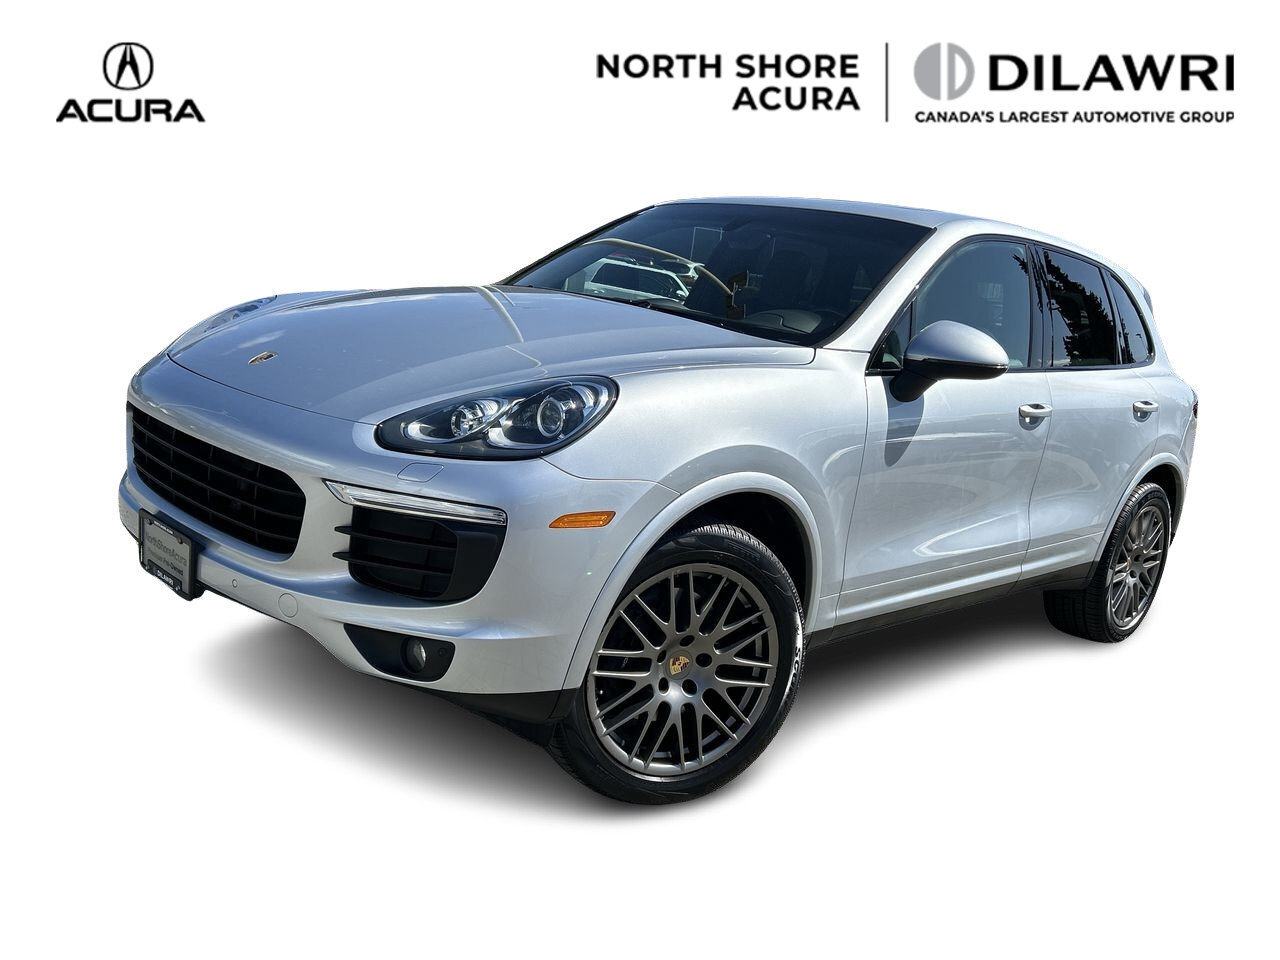 2017 Porsche Cayenne Platinum Edition ** Low KMs, AWD, Pano Roof, Leath